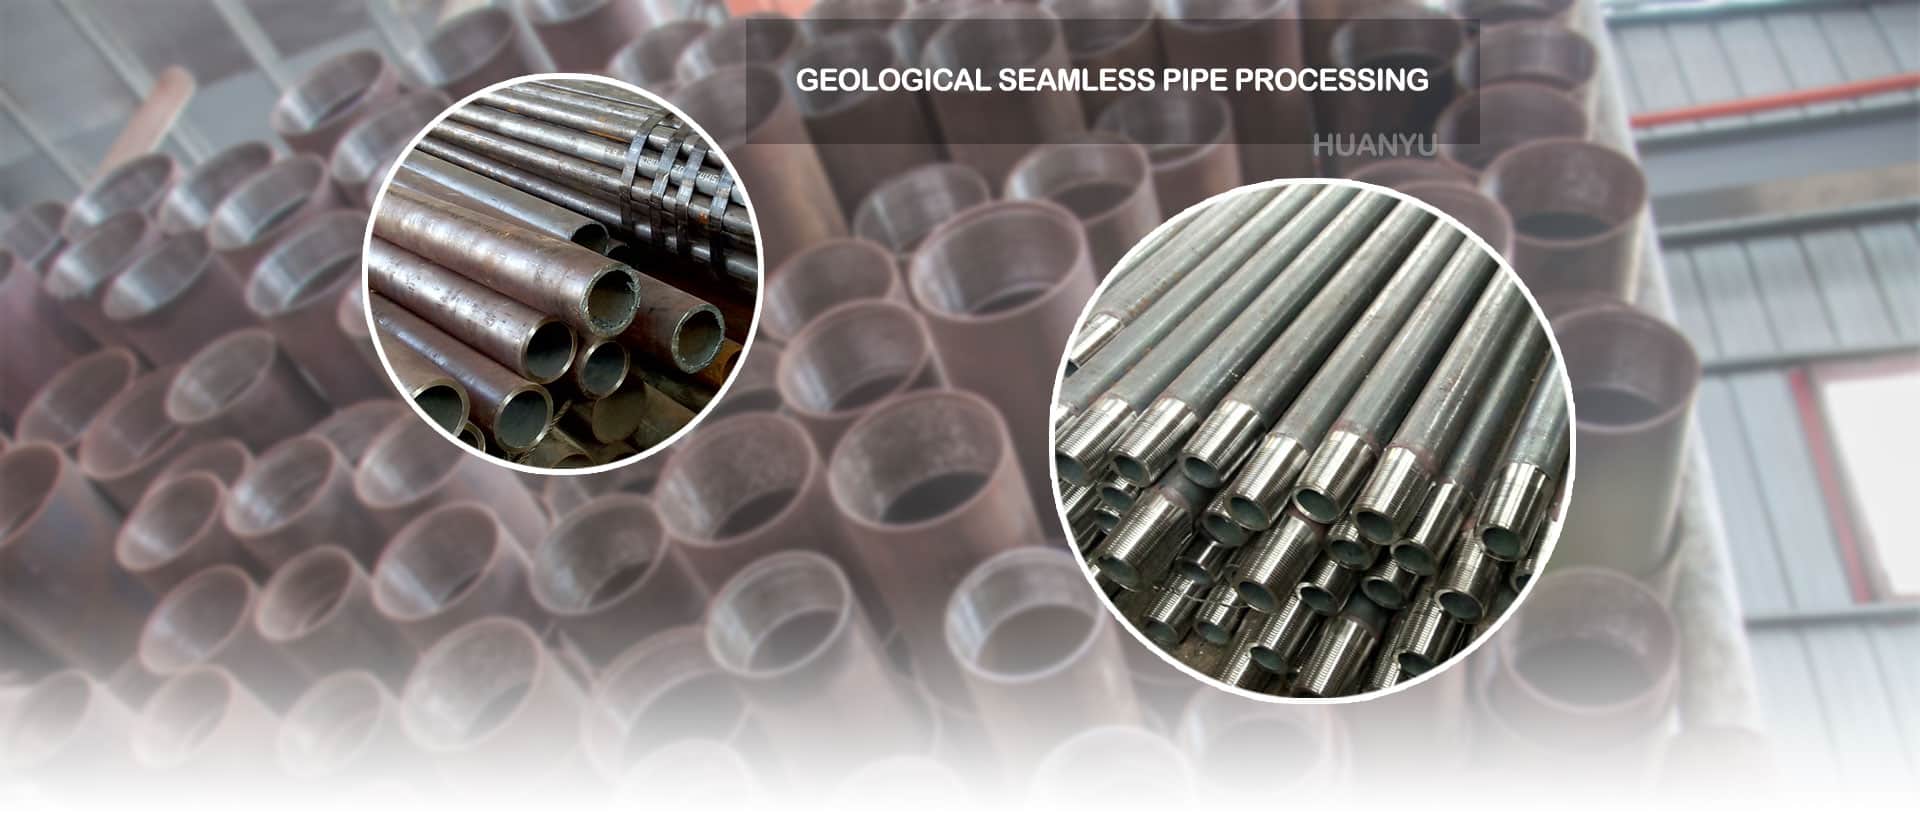 Geological seamless pipe processing